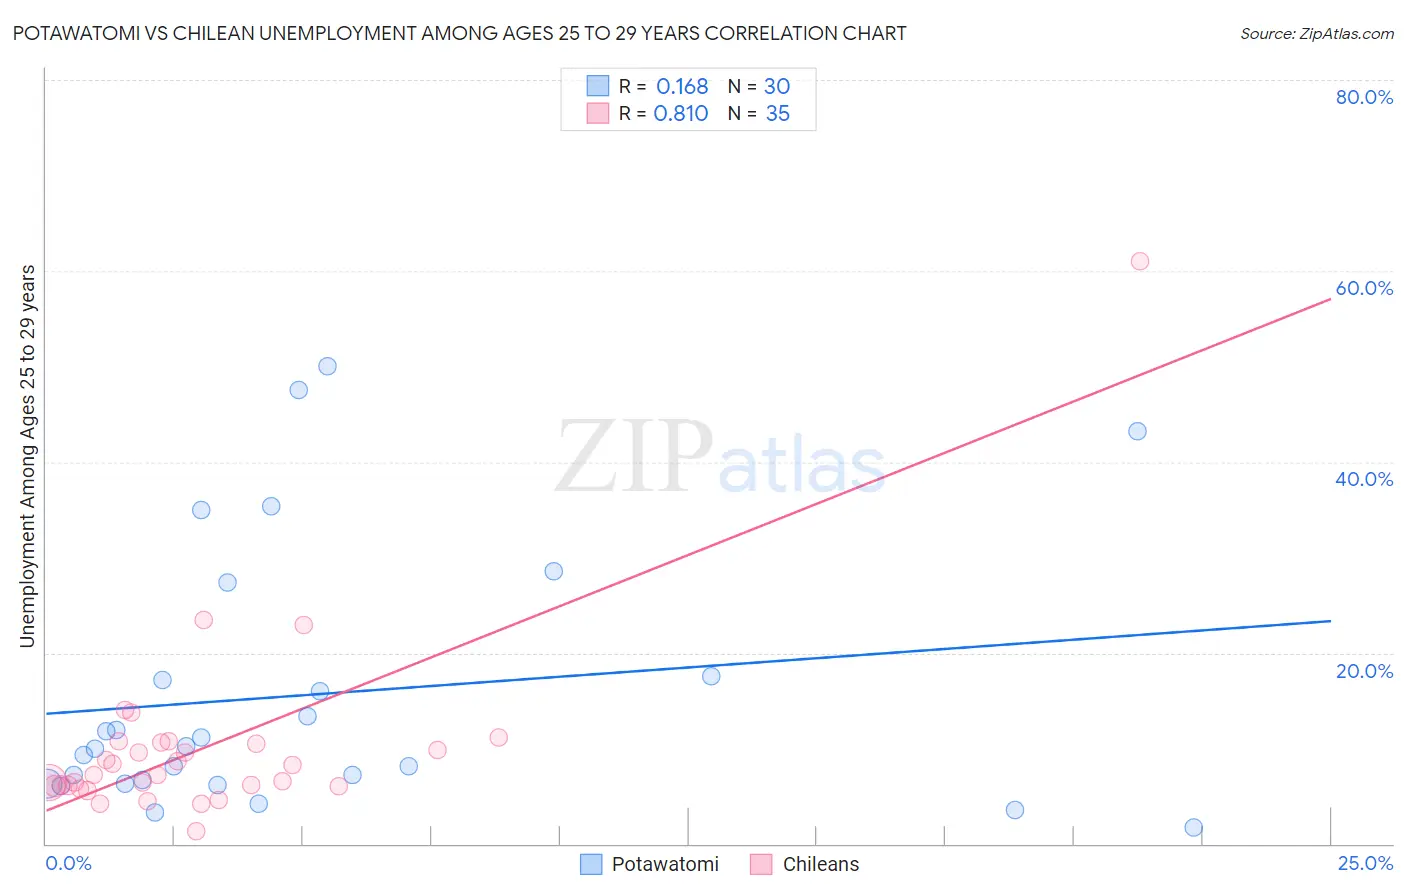 Potawatomi vs Chilean Unemployment Among Ages 25 to 29 years